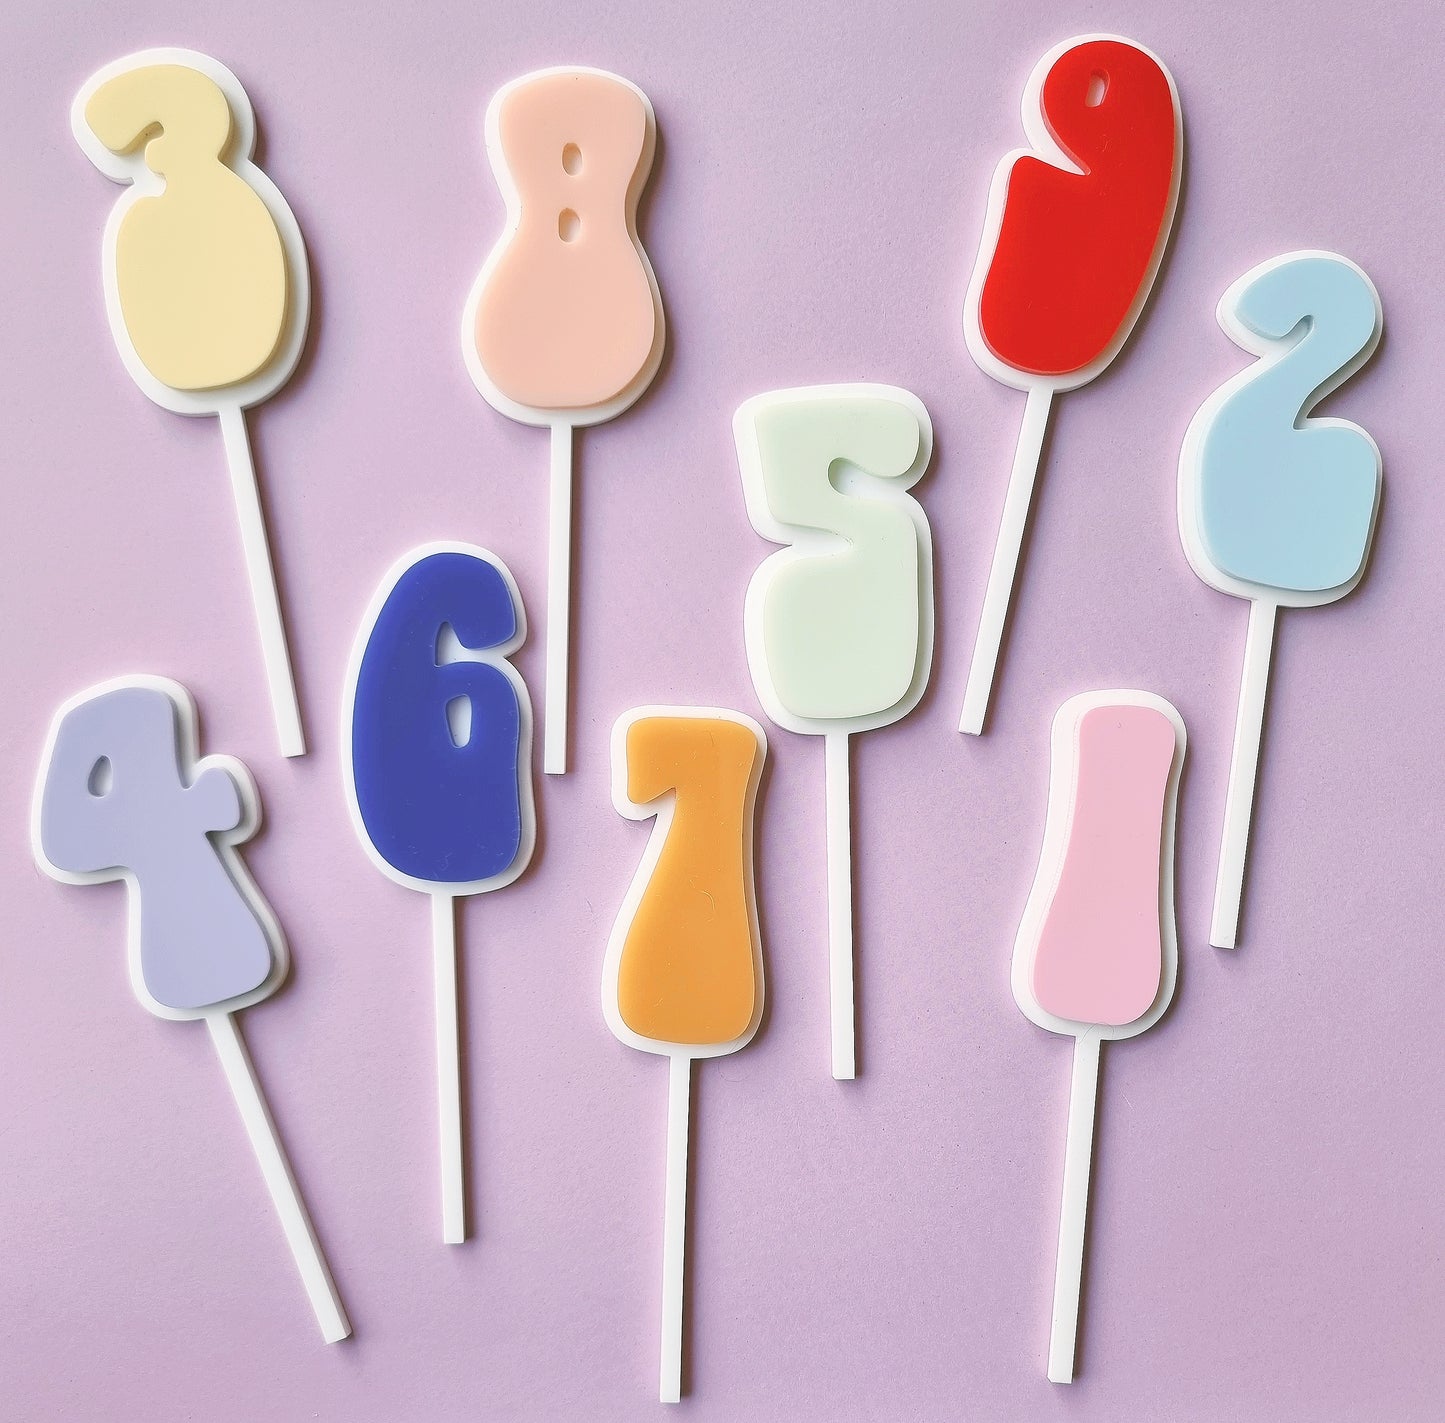 Acrylic 3d Retro Number Cake Topper 0 - 9